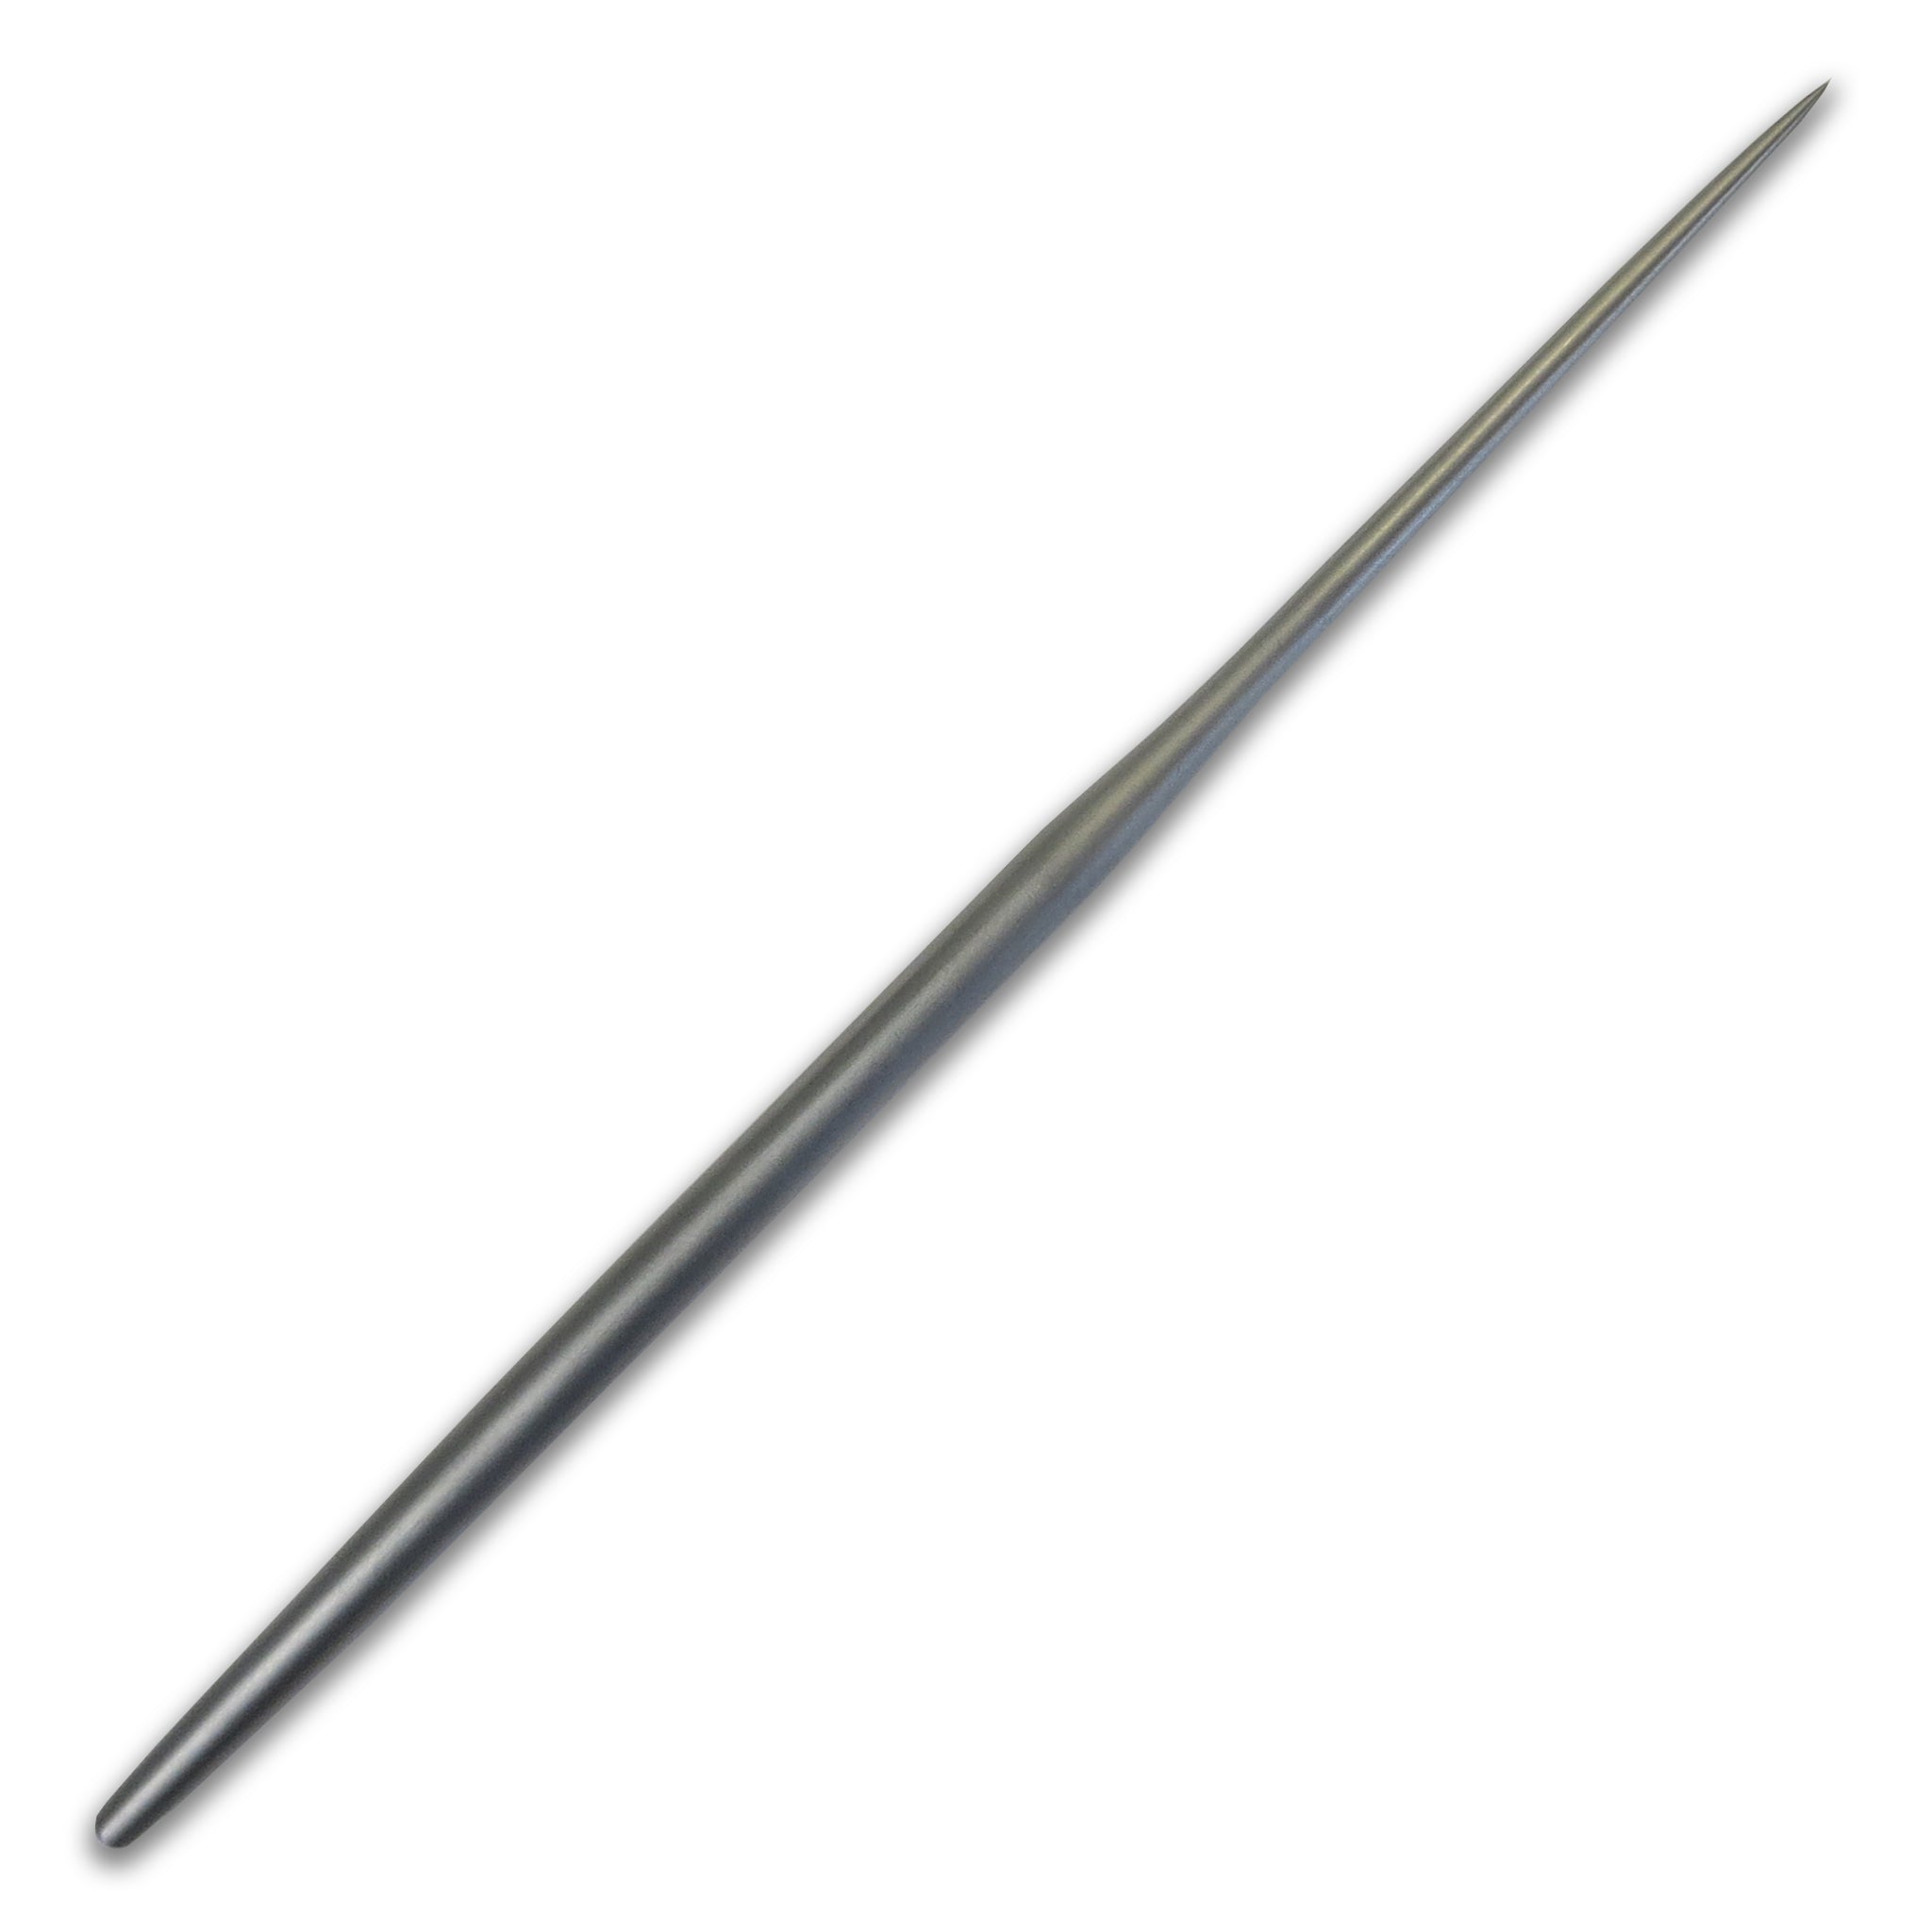 Pro Pin Stainless Steel Rod Needle Detail Tool 6.3in EIC3615